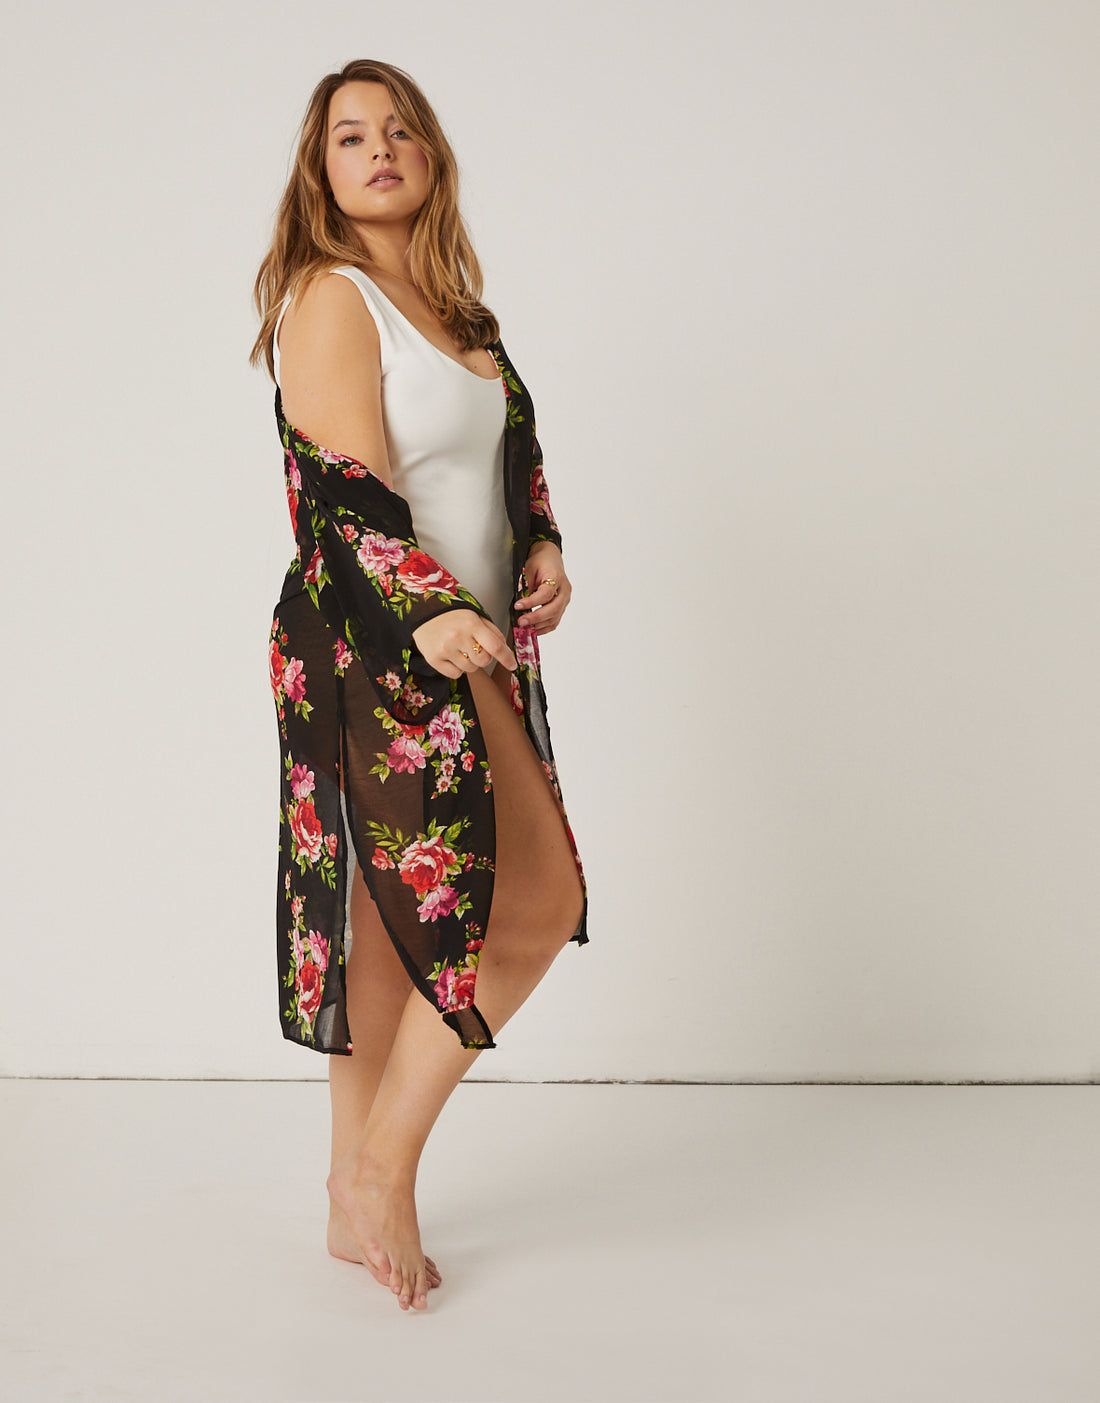 Curve Floral Printed Mesh Cardigan Plus Size Outerwear -2020AVE